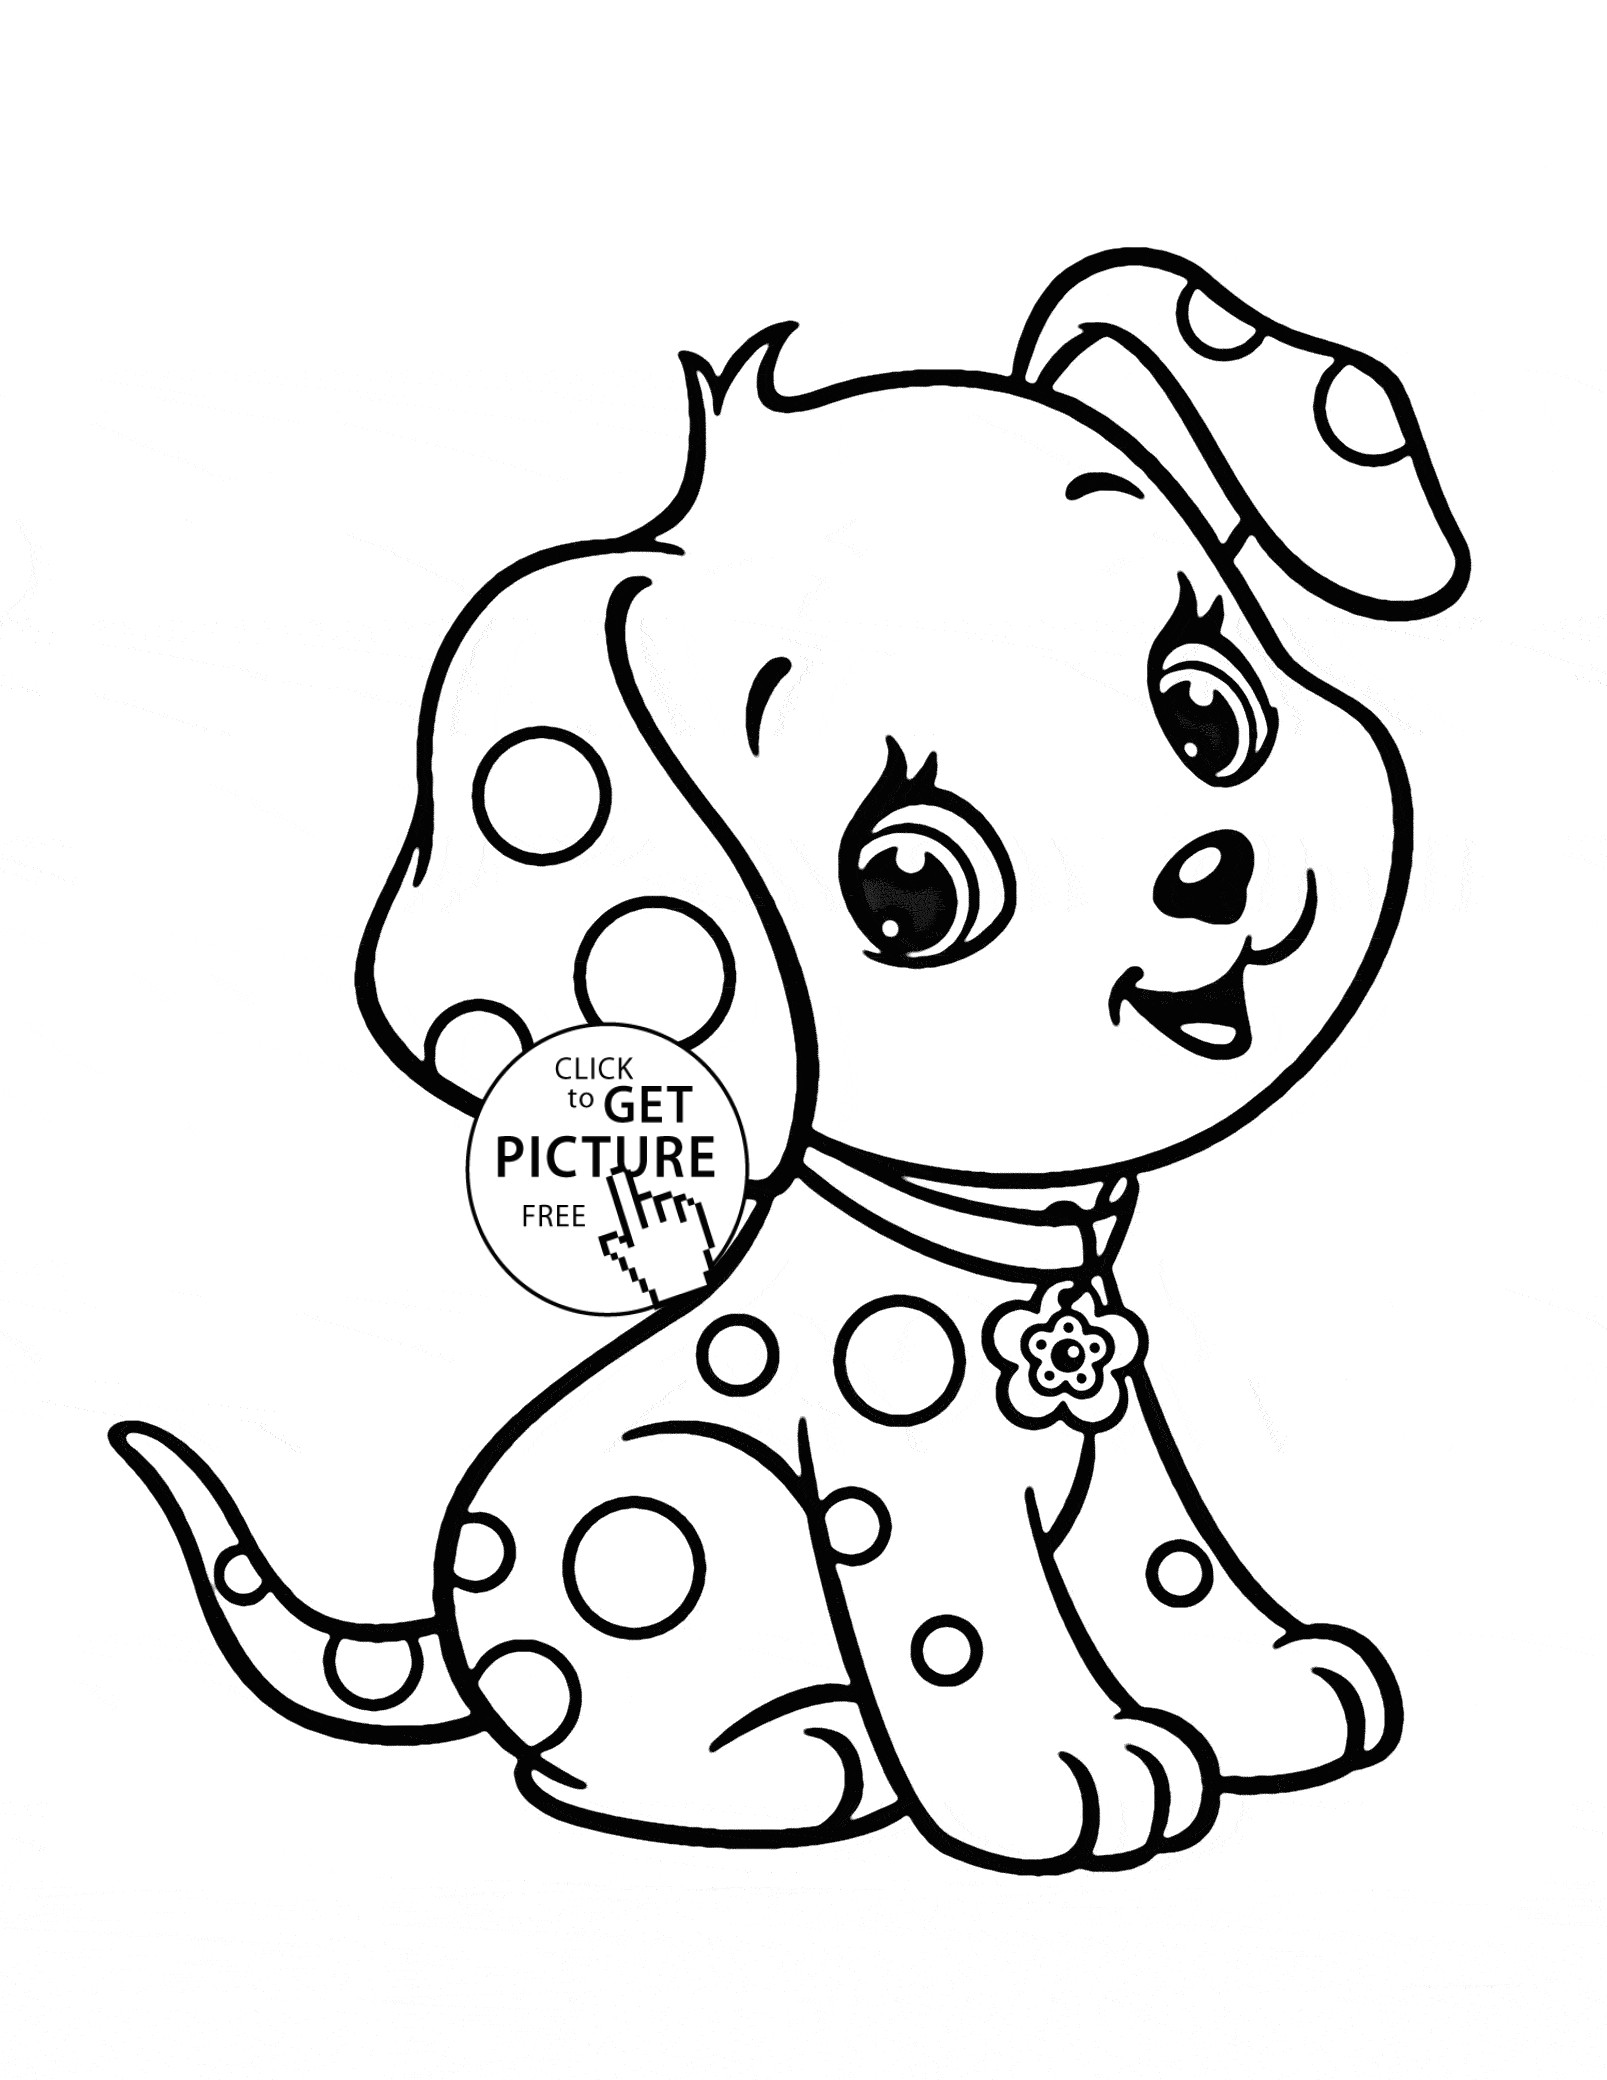 Cartoon Drawing Worksheet Excellent Article with Great Ideas About Dogs Dogs Tips